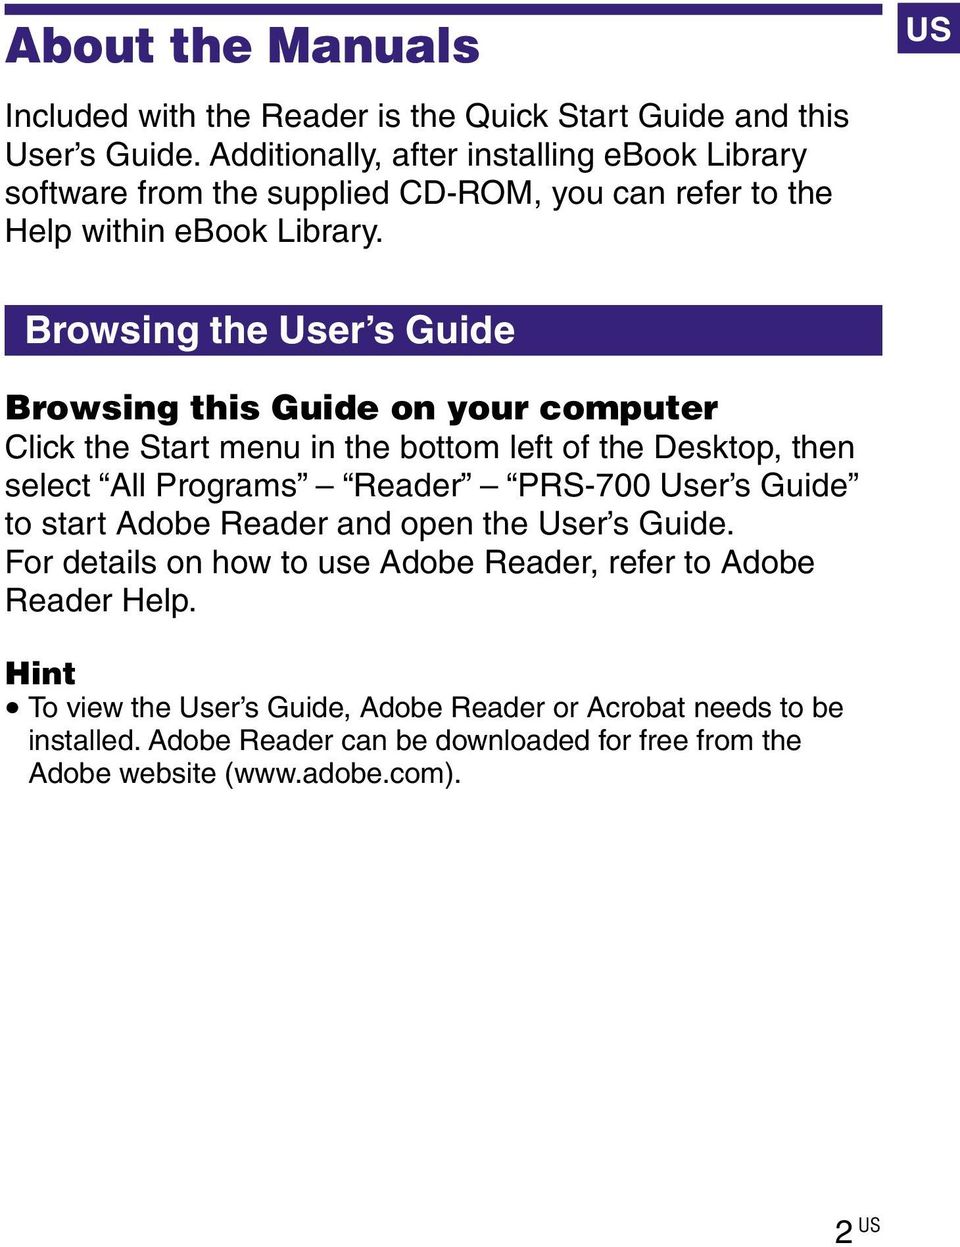 US Browsing the User s Guide Browsing this Guide on your computer Click the Start menu in the bottom left of the Desktop, then select All Programs Reader PRS-700 User s